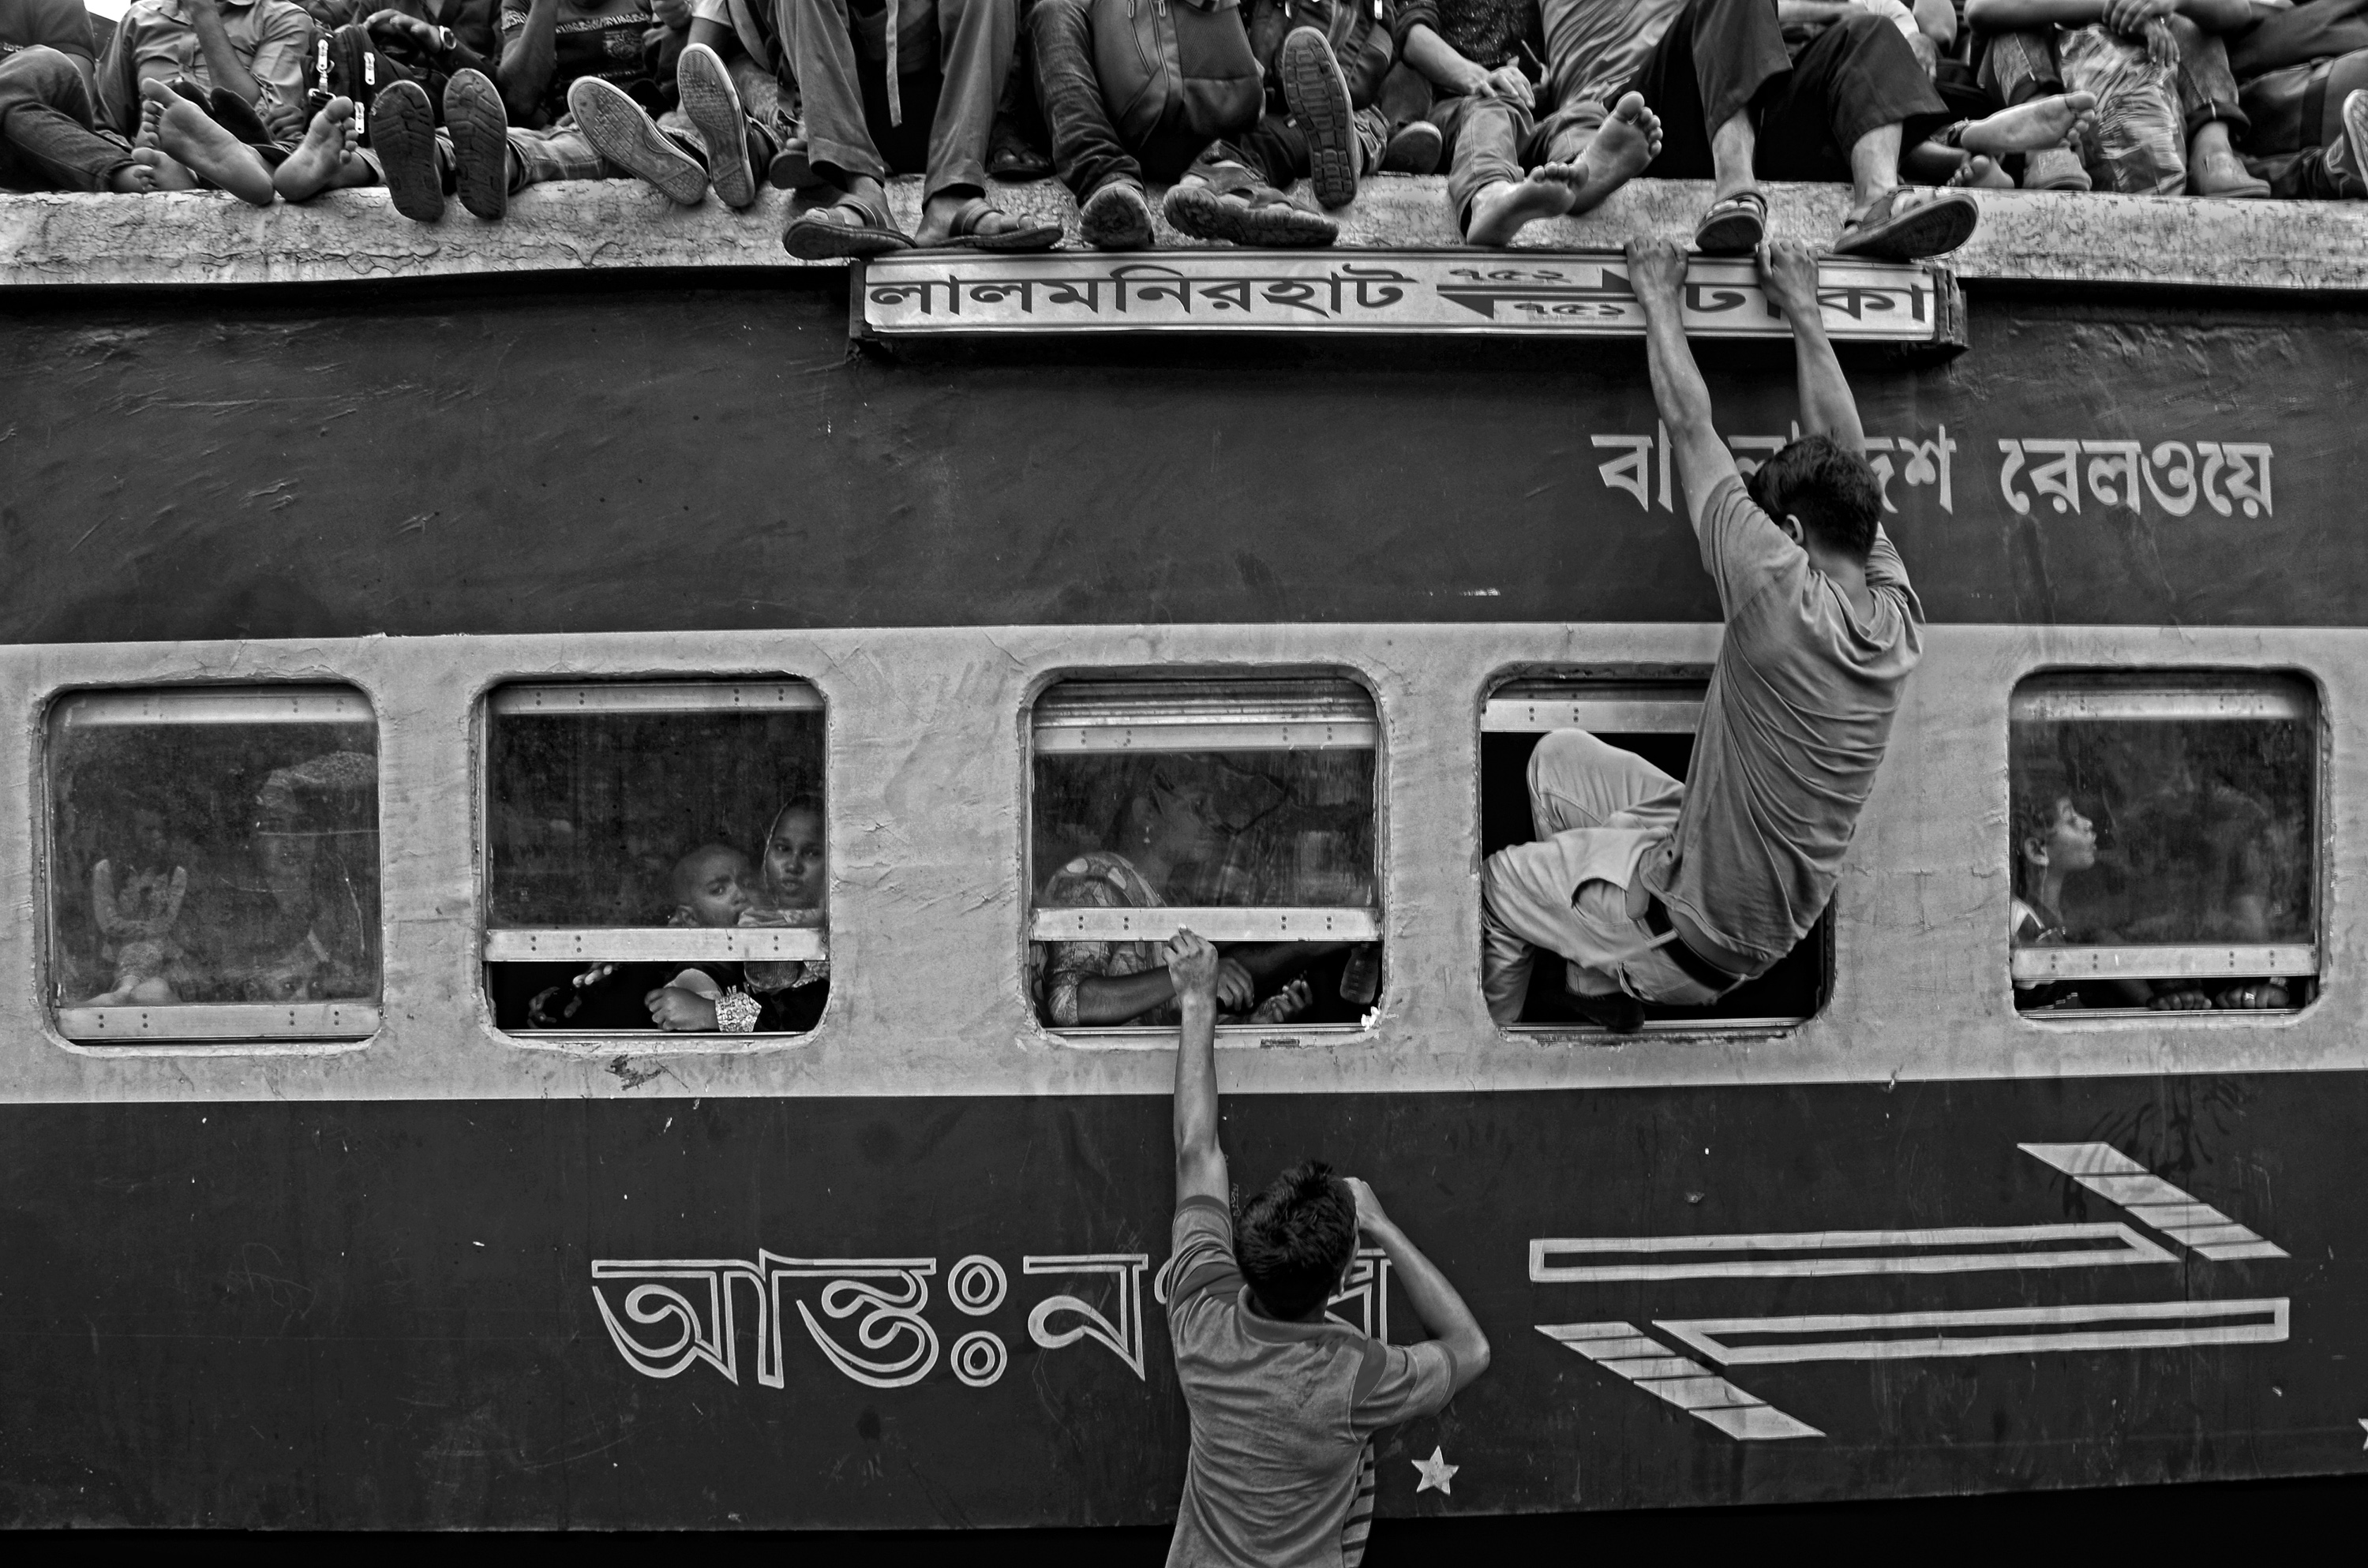 When the train are overloaded including roof , the passengers want to take a place in train by entering into the window. They want to reach their home at any cost.